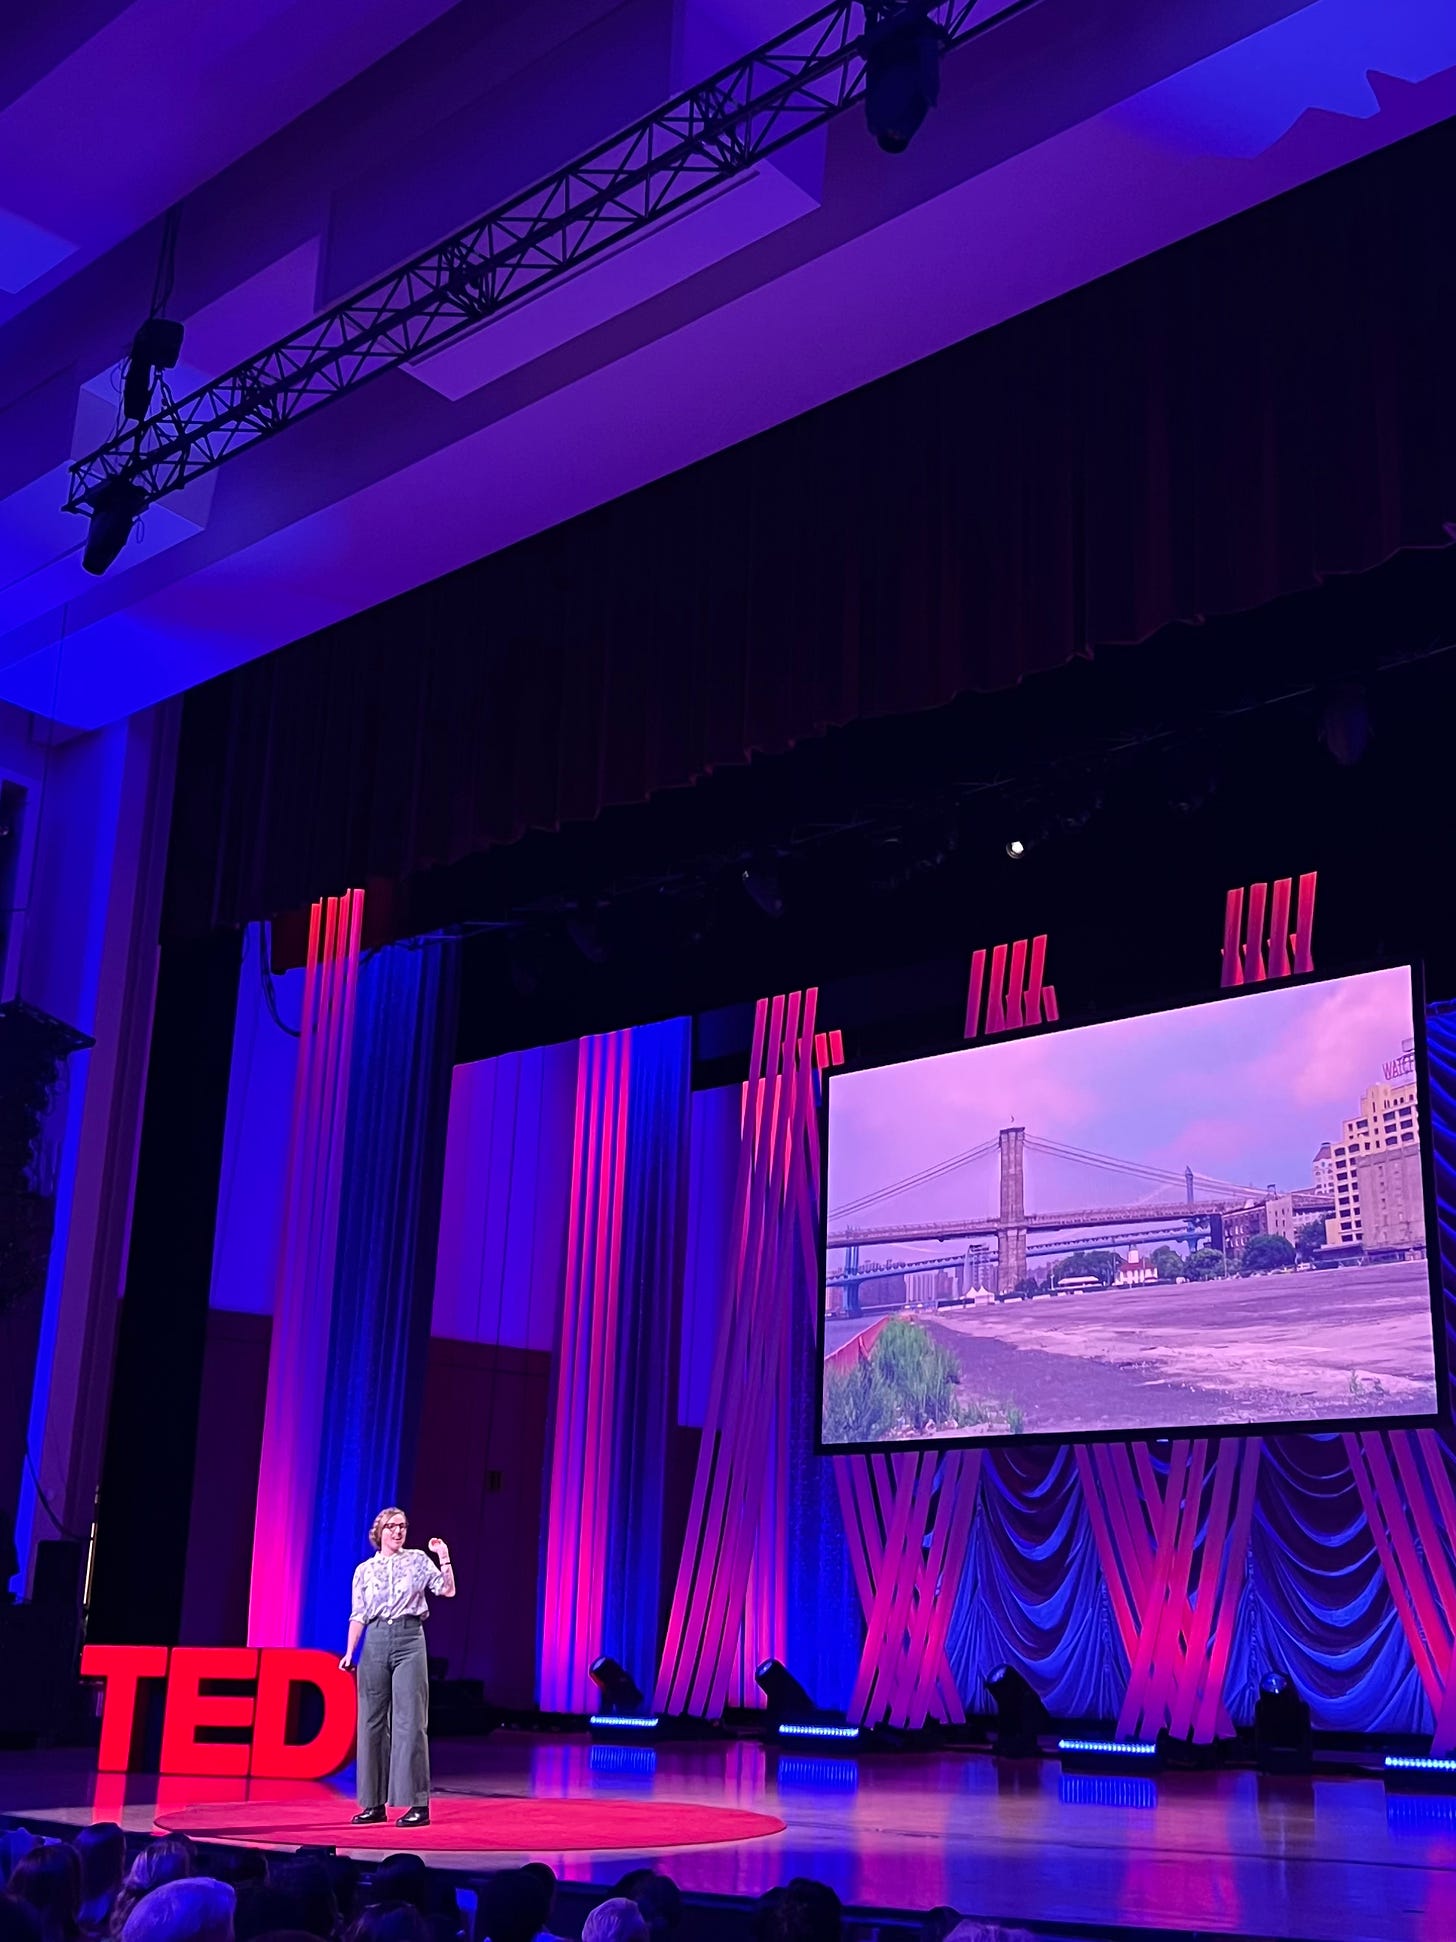 The TED stage with Rebecca McMackin